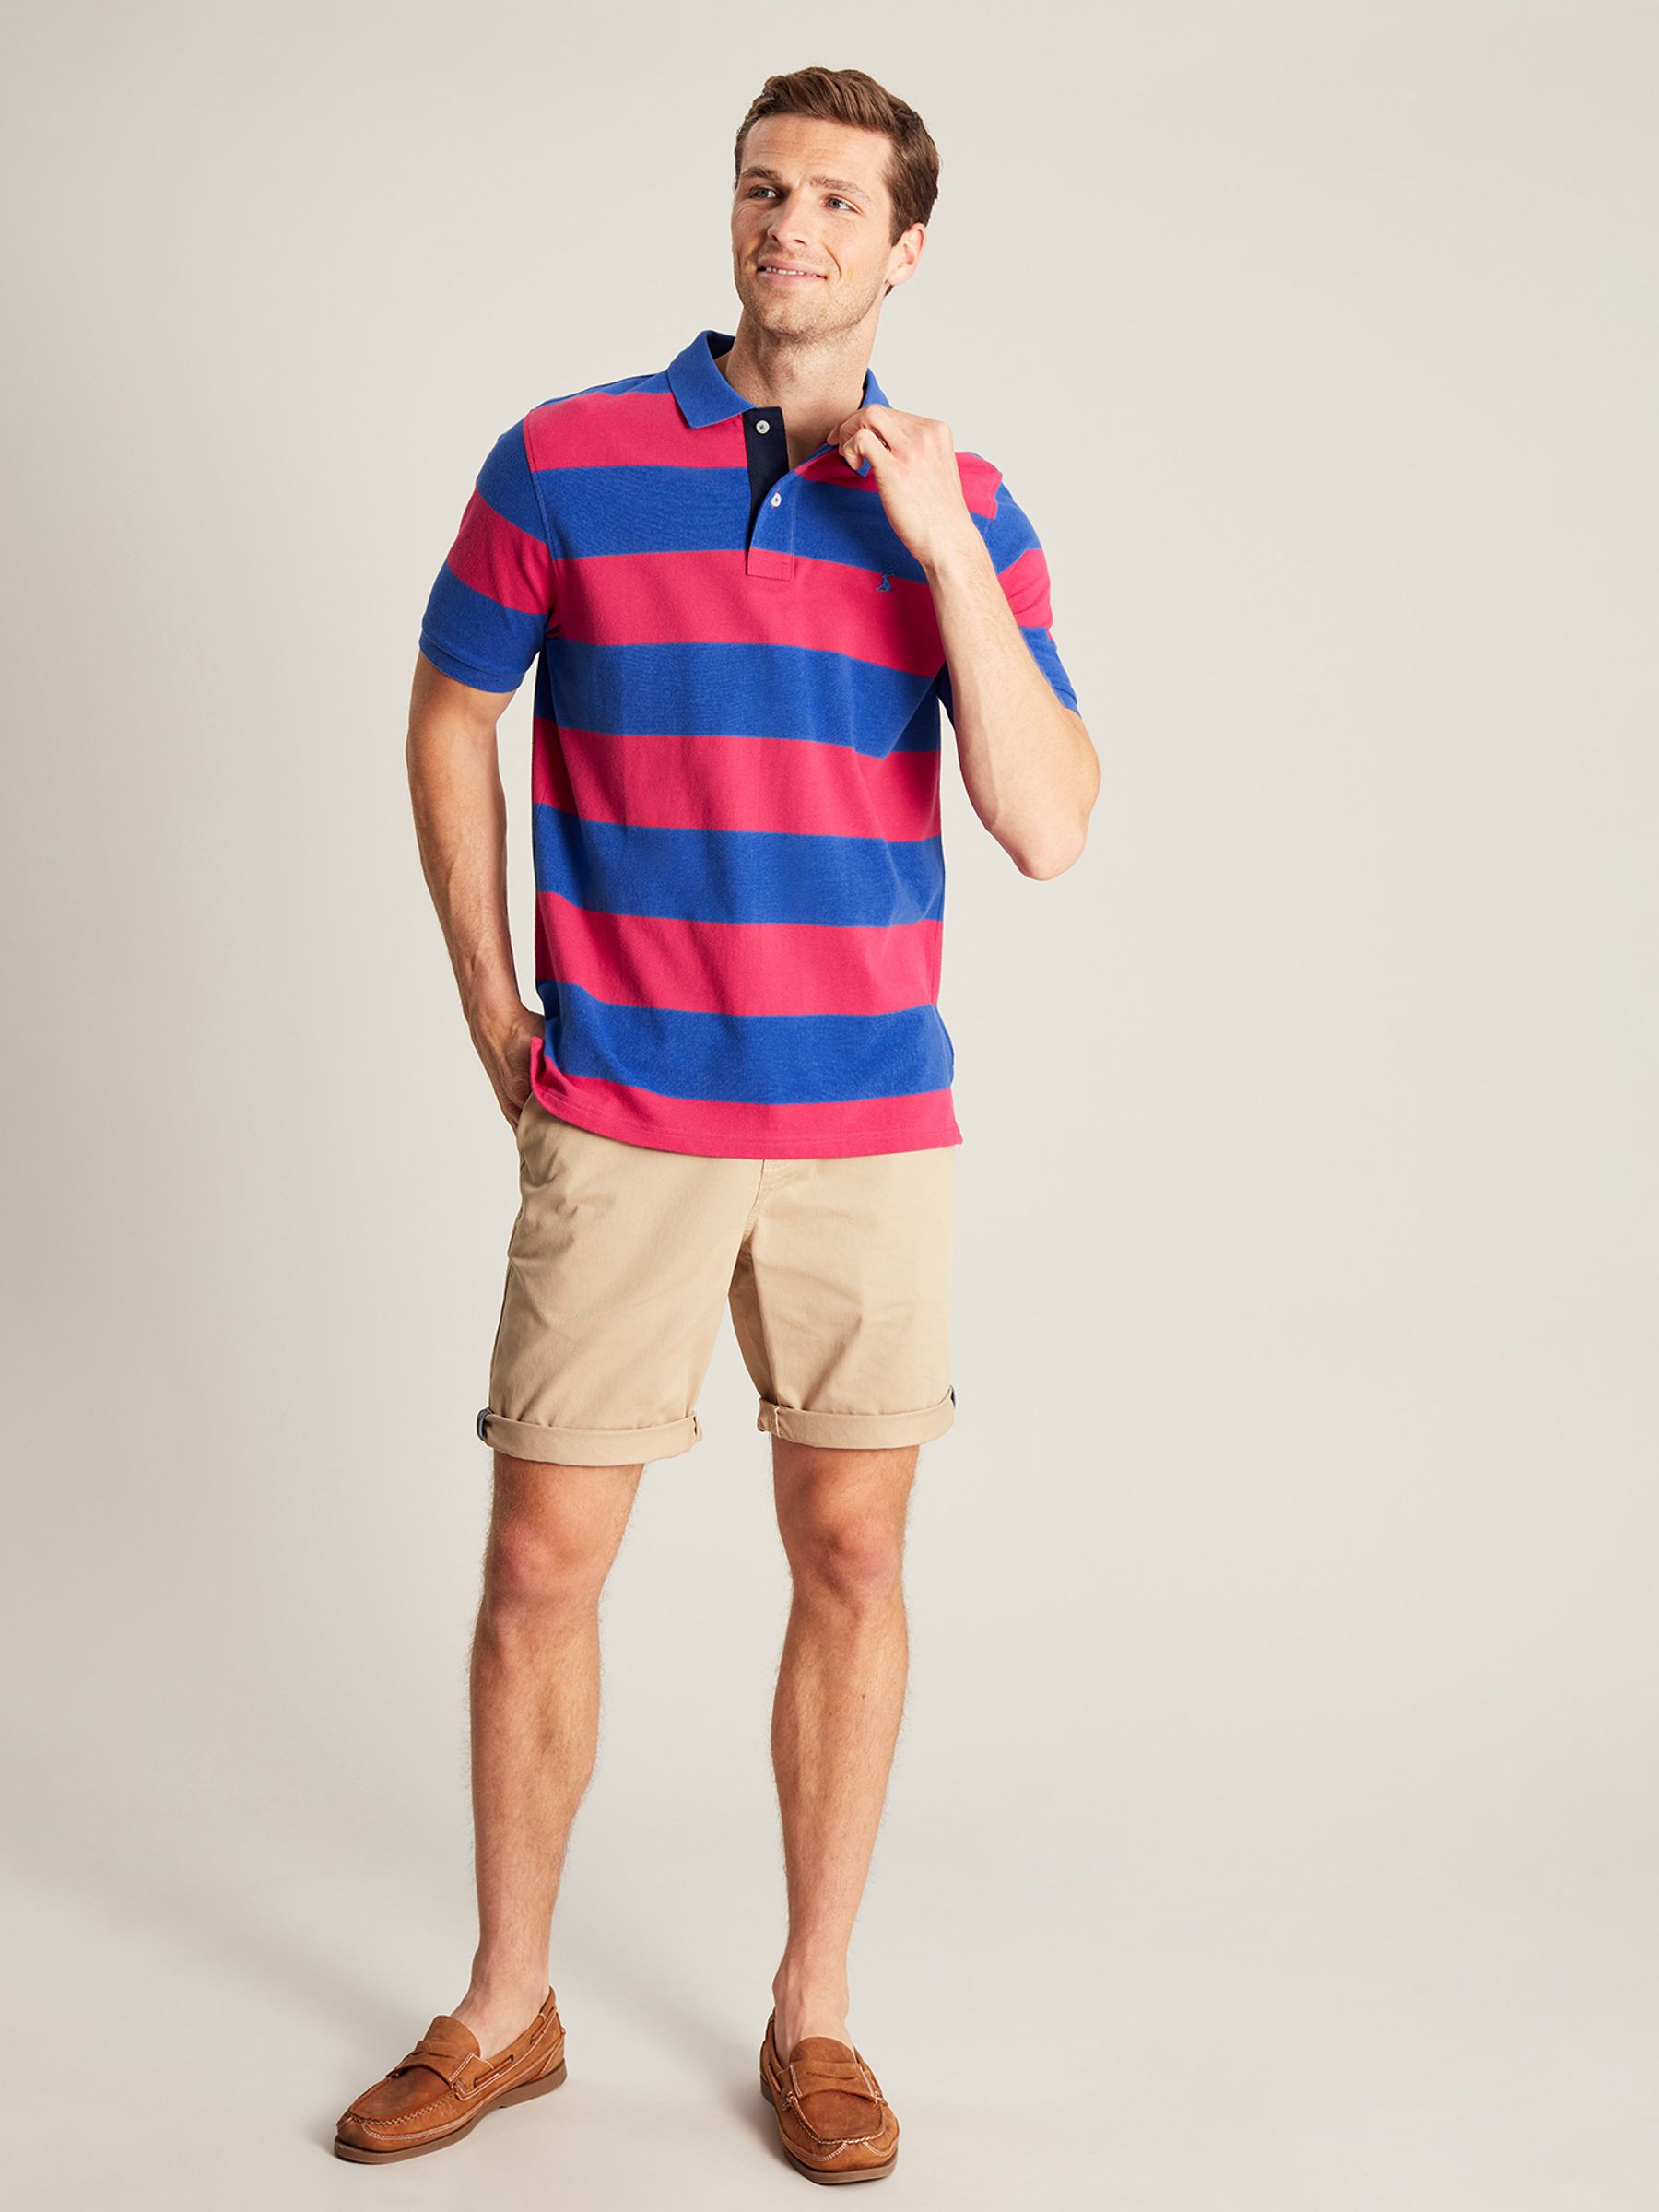 Buy Filbert Pink Polo Shirt from the Joules online shop